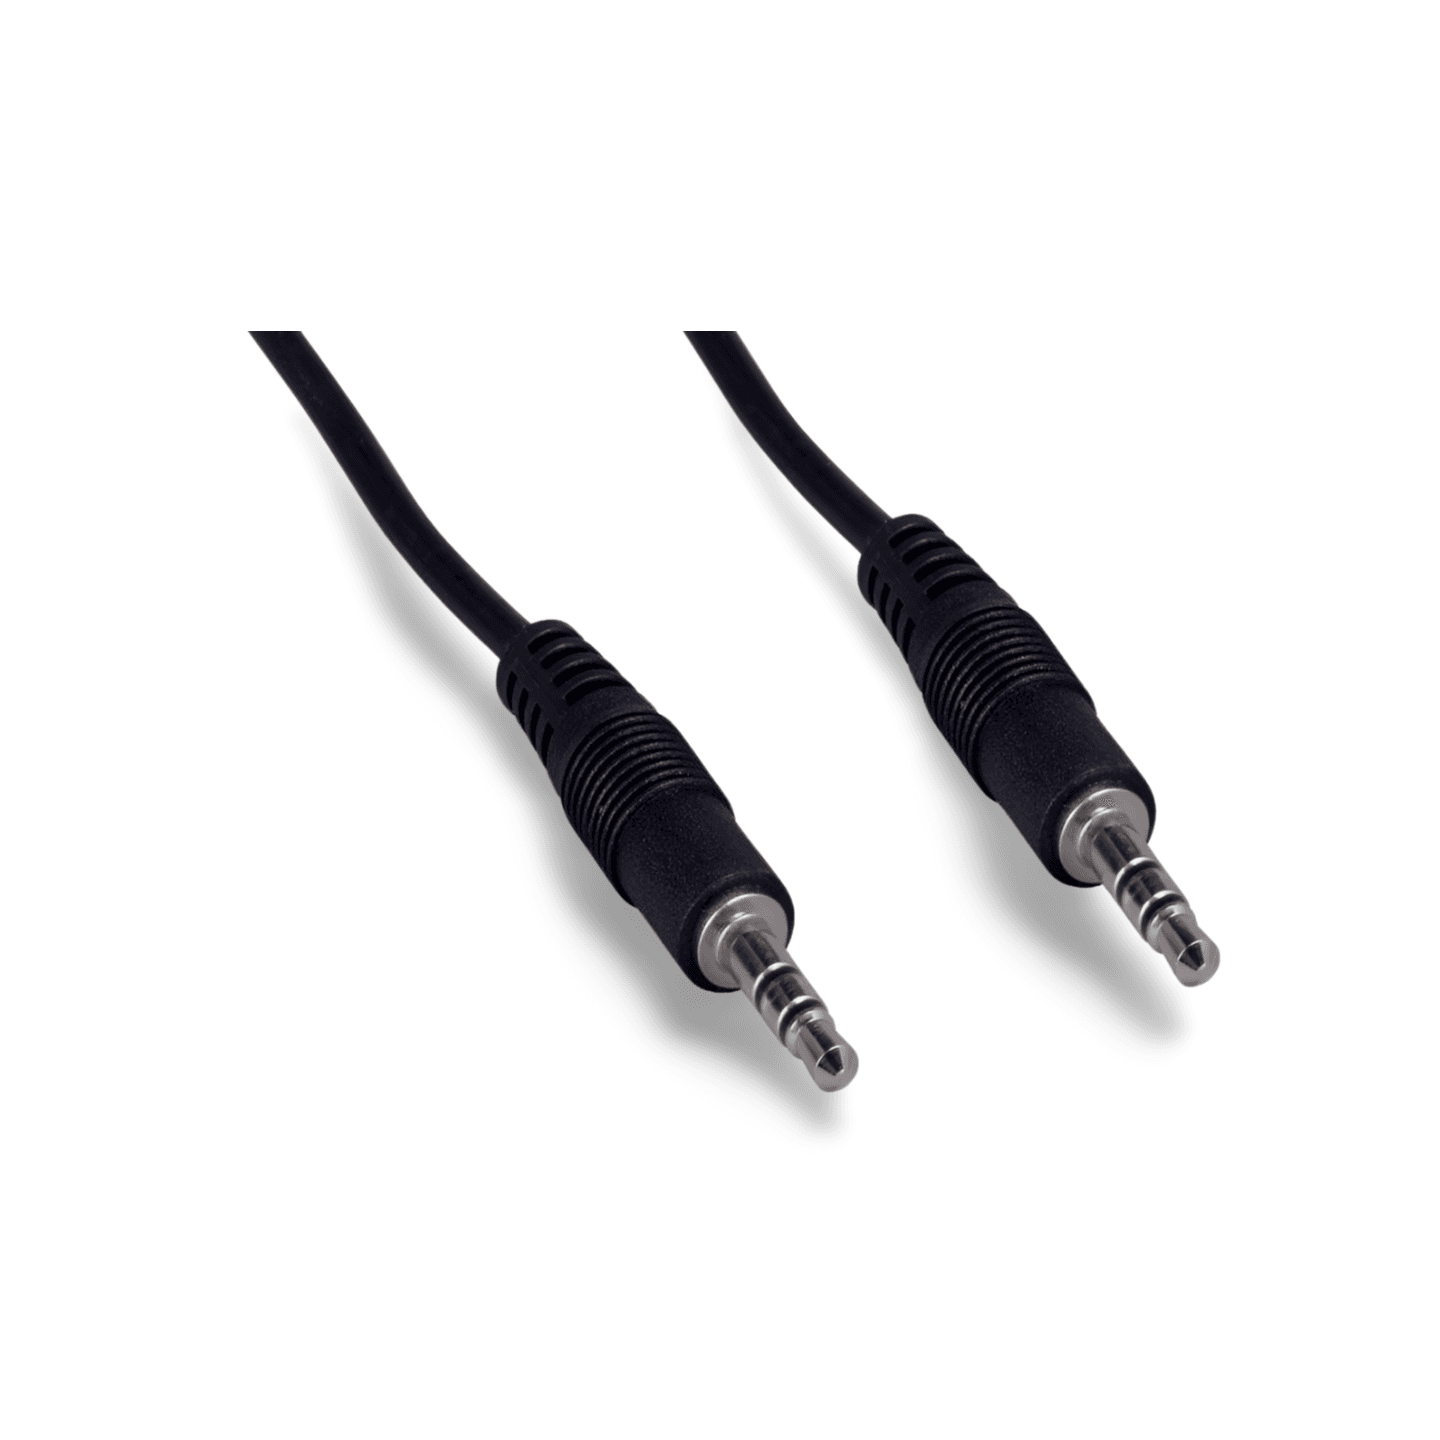 25ft 3.5mm Aux Cord Male to Male Stereo Audio Cable black